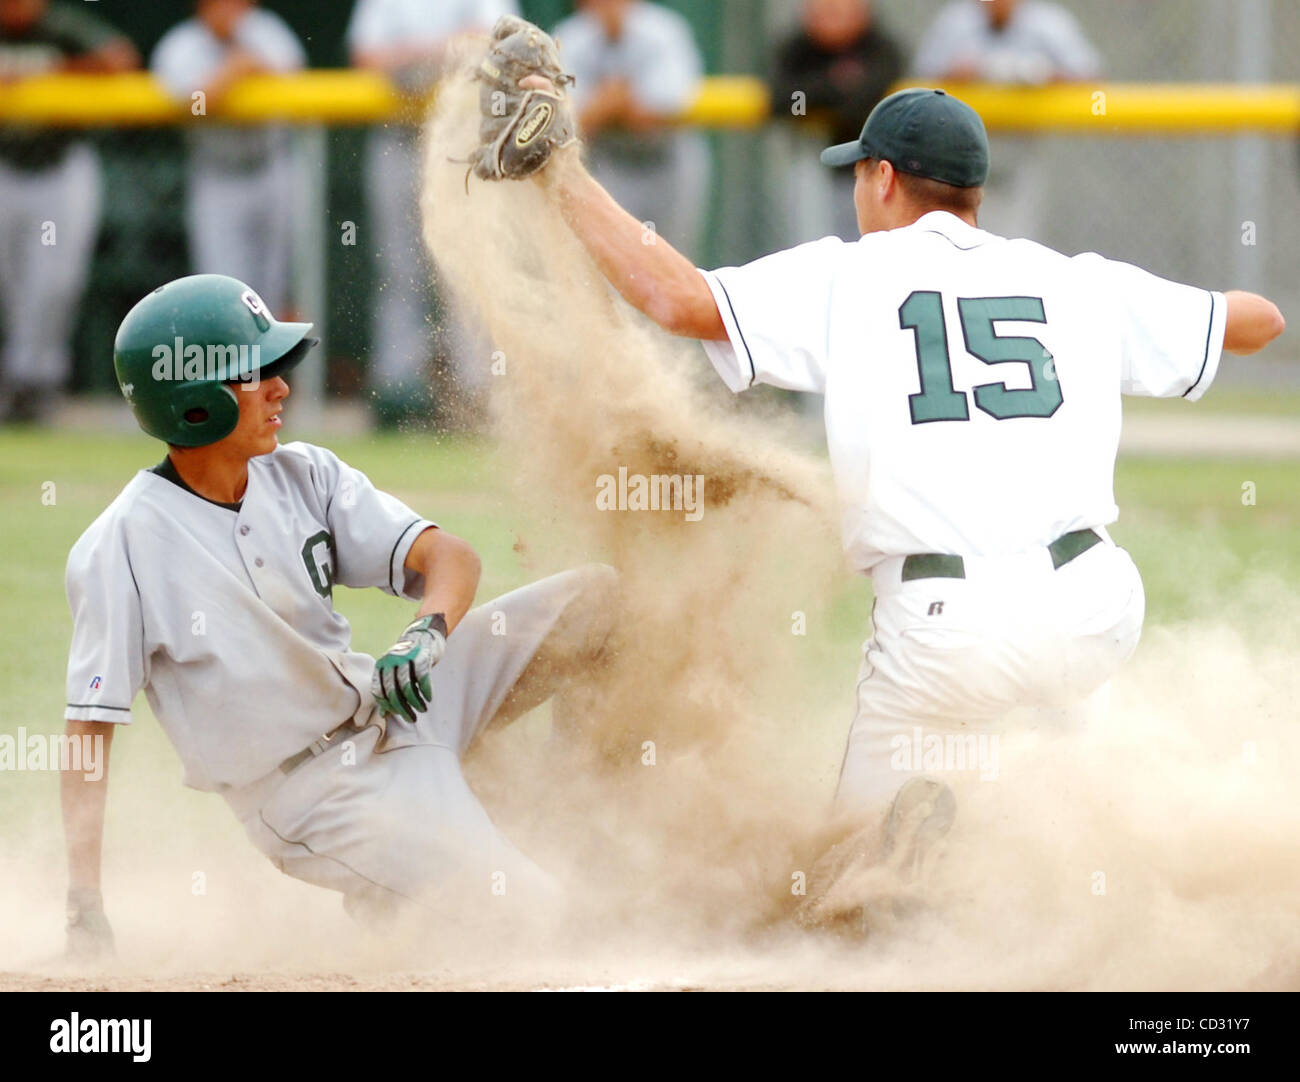 Manteca High's Tim Larson tags out Central Valley runner William Mestas at third base during a game at Manteca High on Wednesday, April 2, 2008 in Manteca, Calif.(Gina Halferty/San Joaquin Herald) Stock Photo